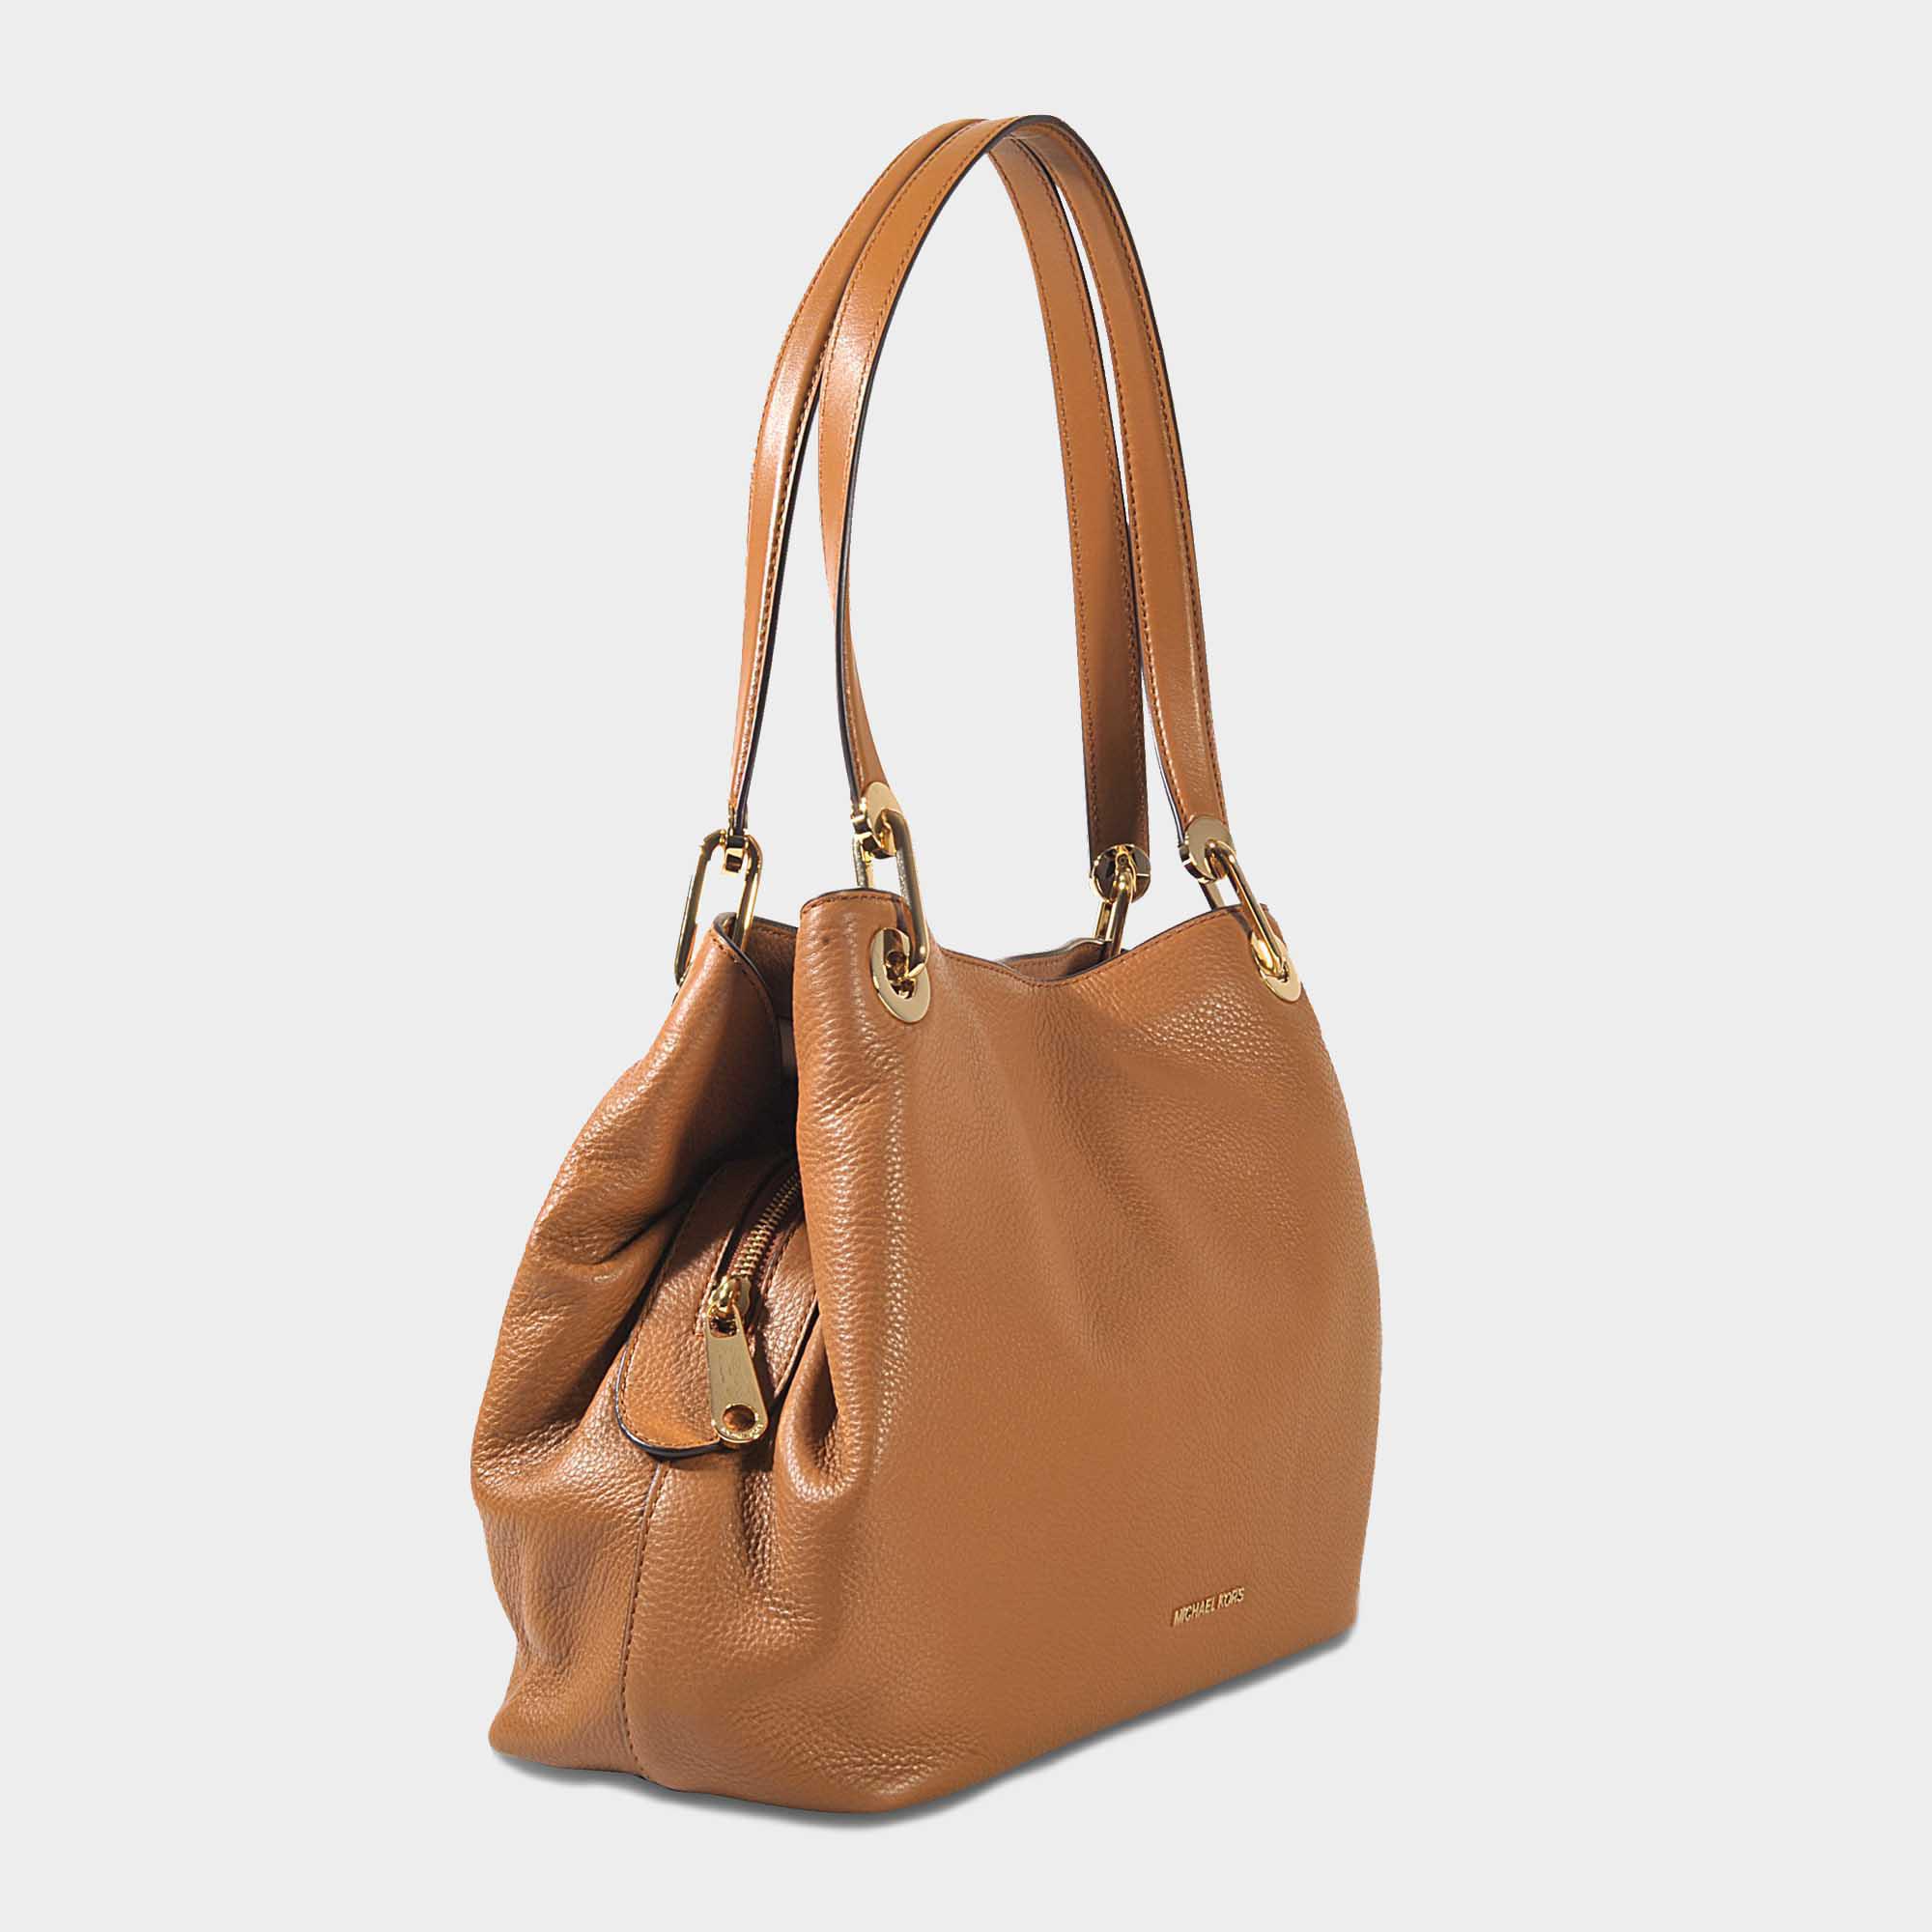 MICHAEL Michael Kors Raven Large Shoulder Tote Bag In Acorn Small Pebble Leather in Brown - Lyst